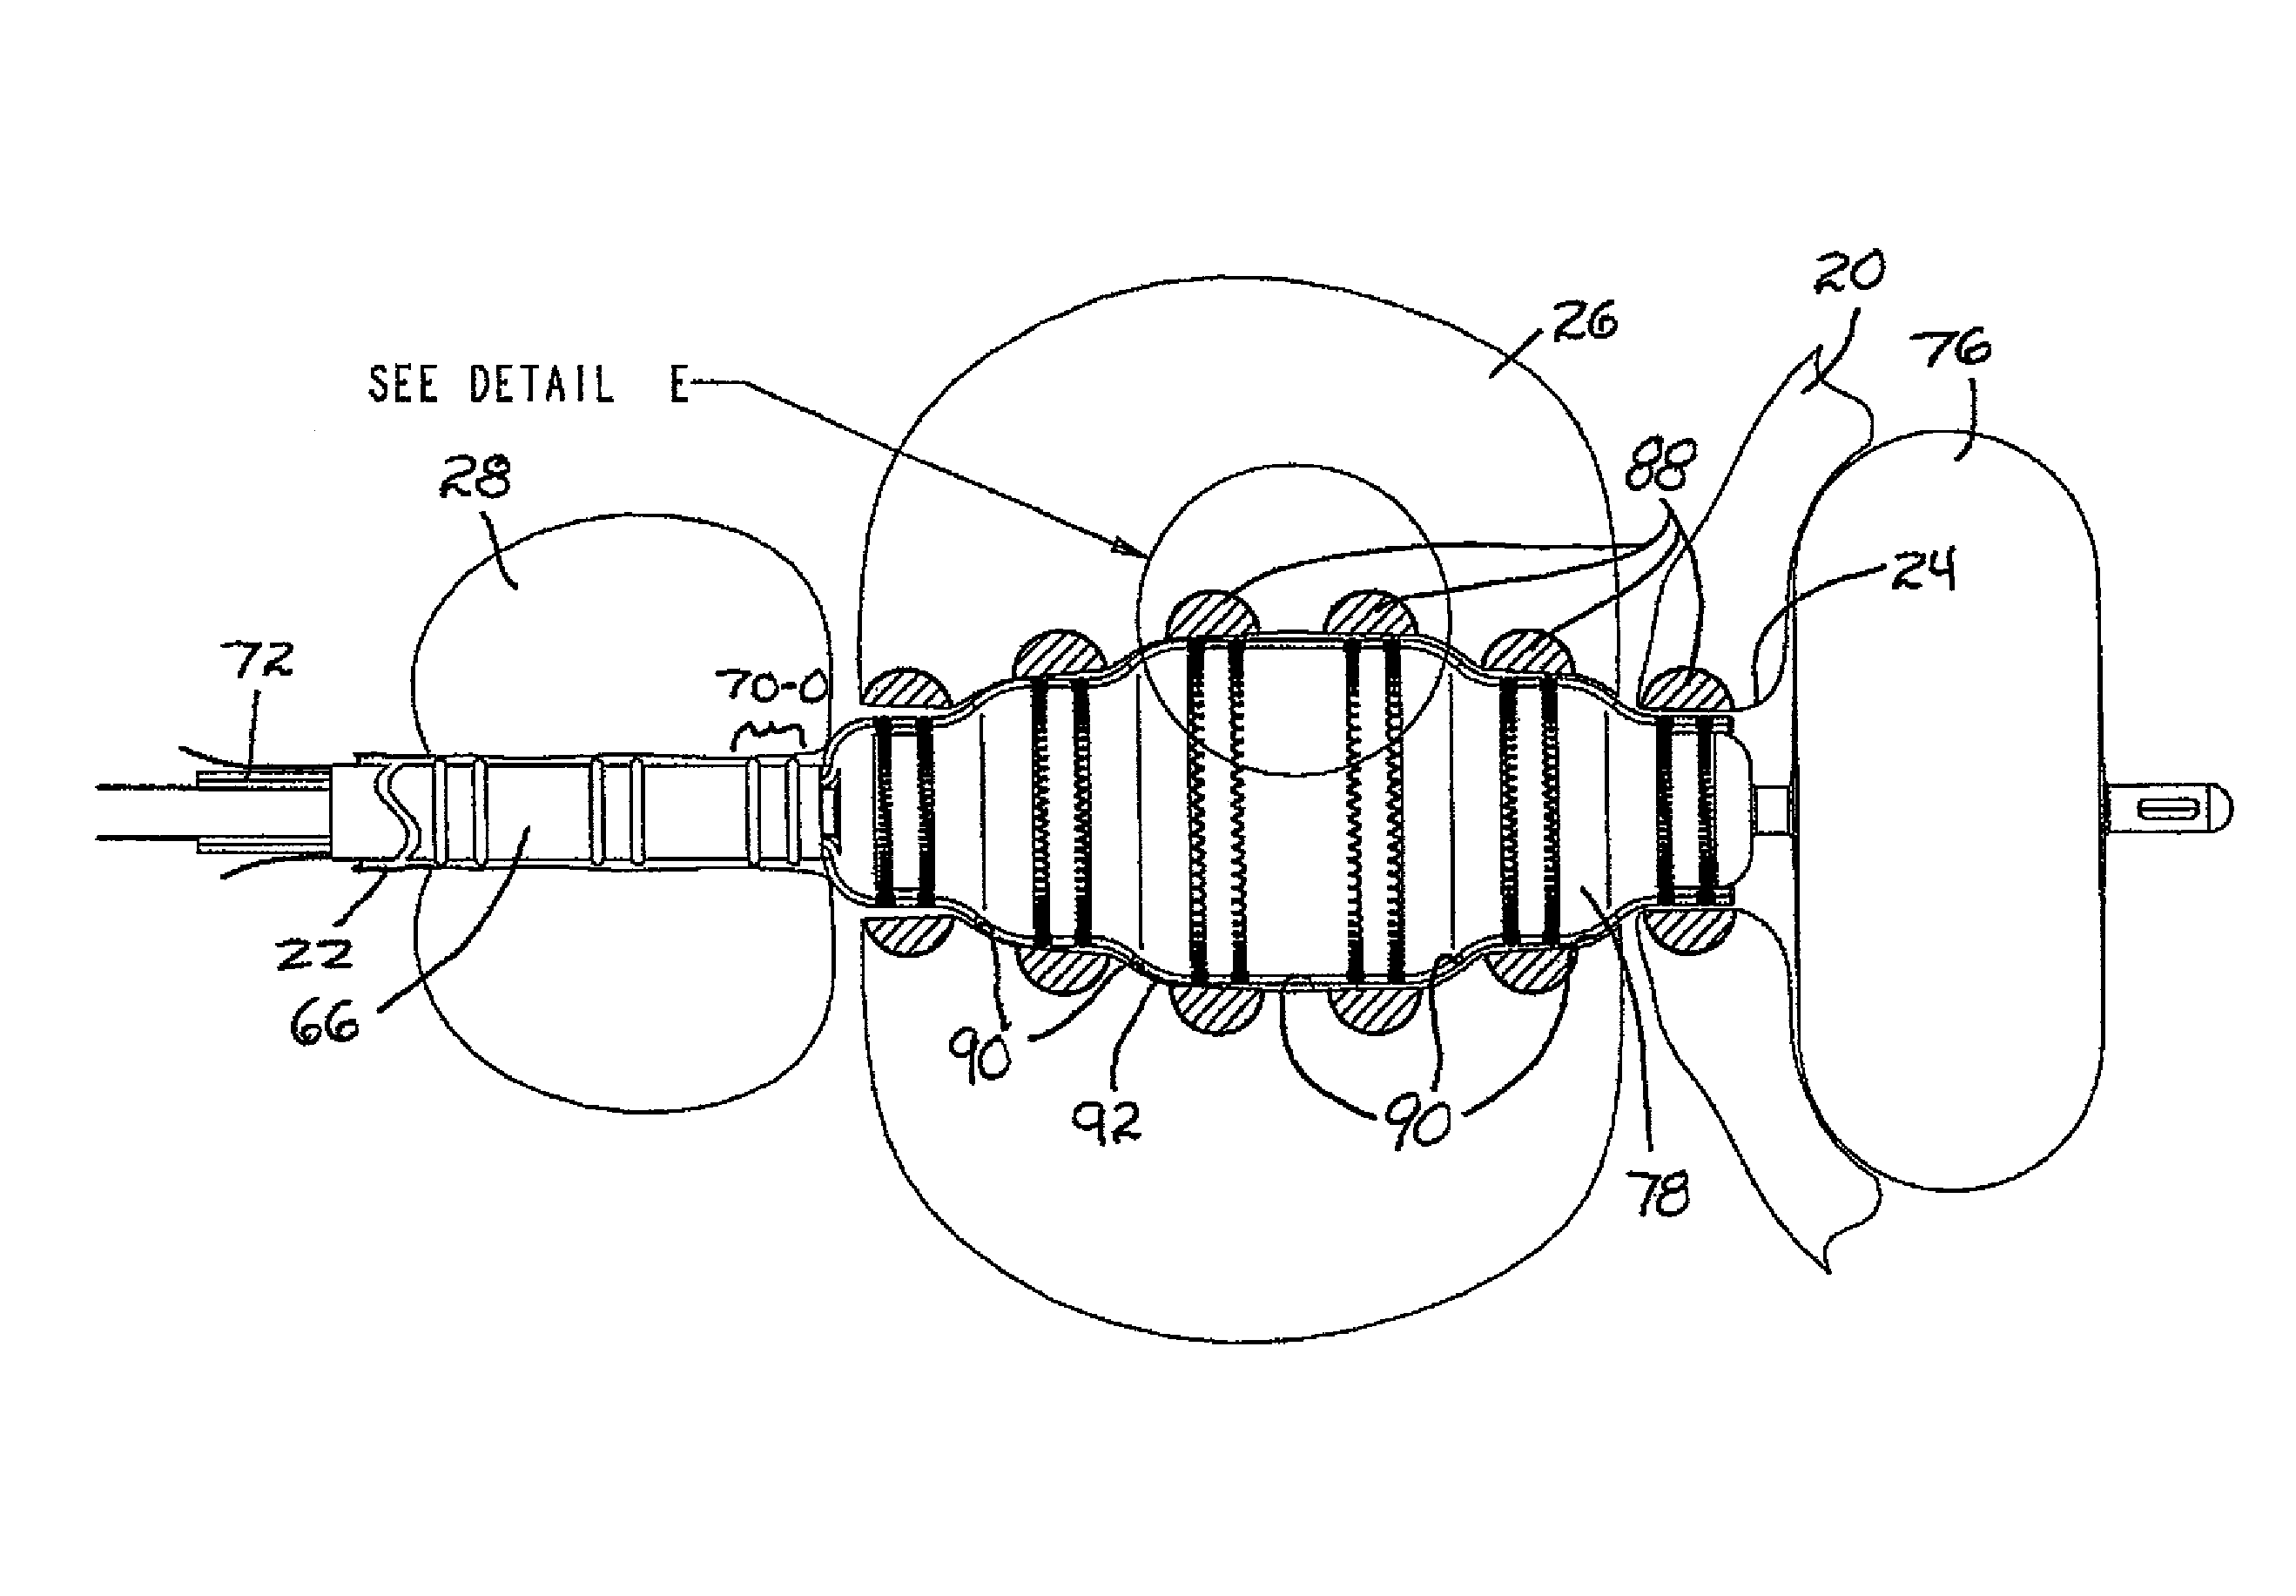 Method and apparatus for remodeling/profiling a tissue lumen, particularly in the urethral lumen in the prostate gland